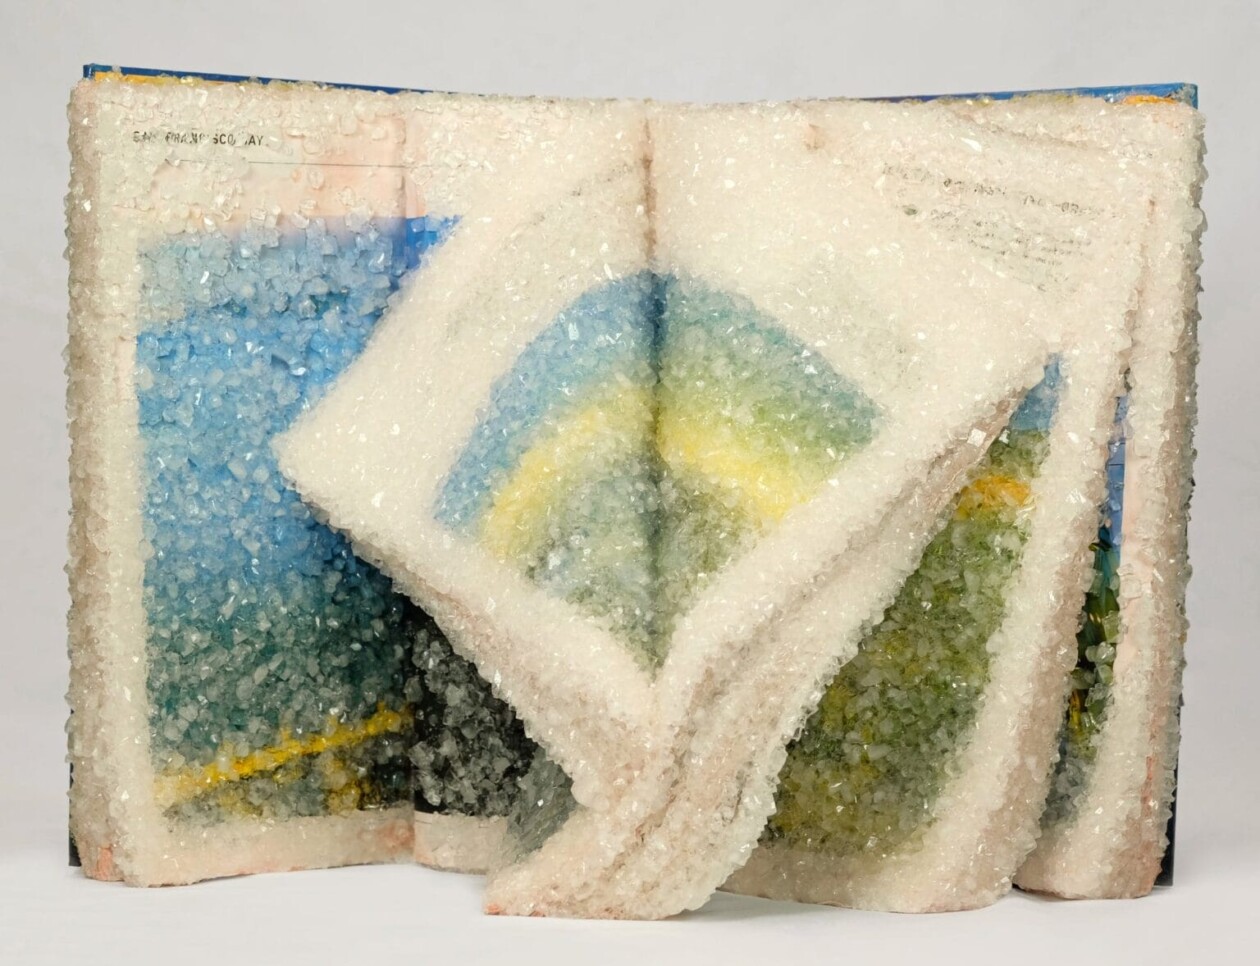 Crystallized Books, A Sculptures Series By Alexis Arnold (26)